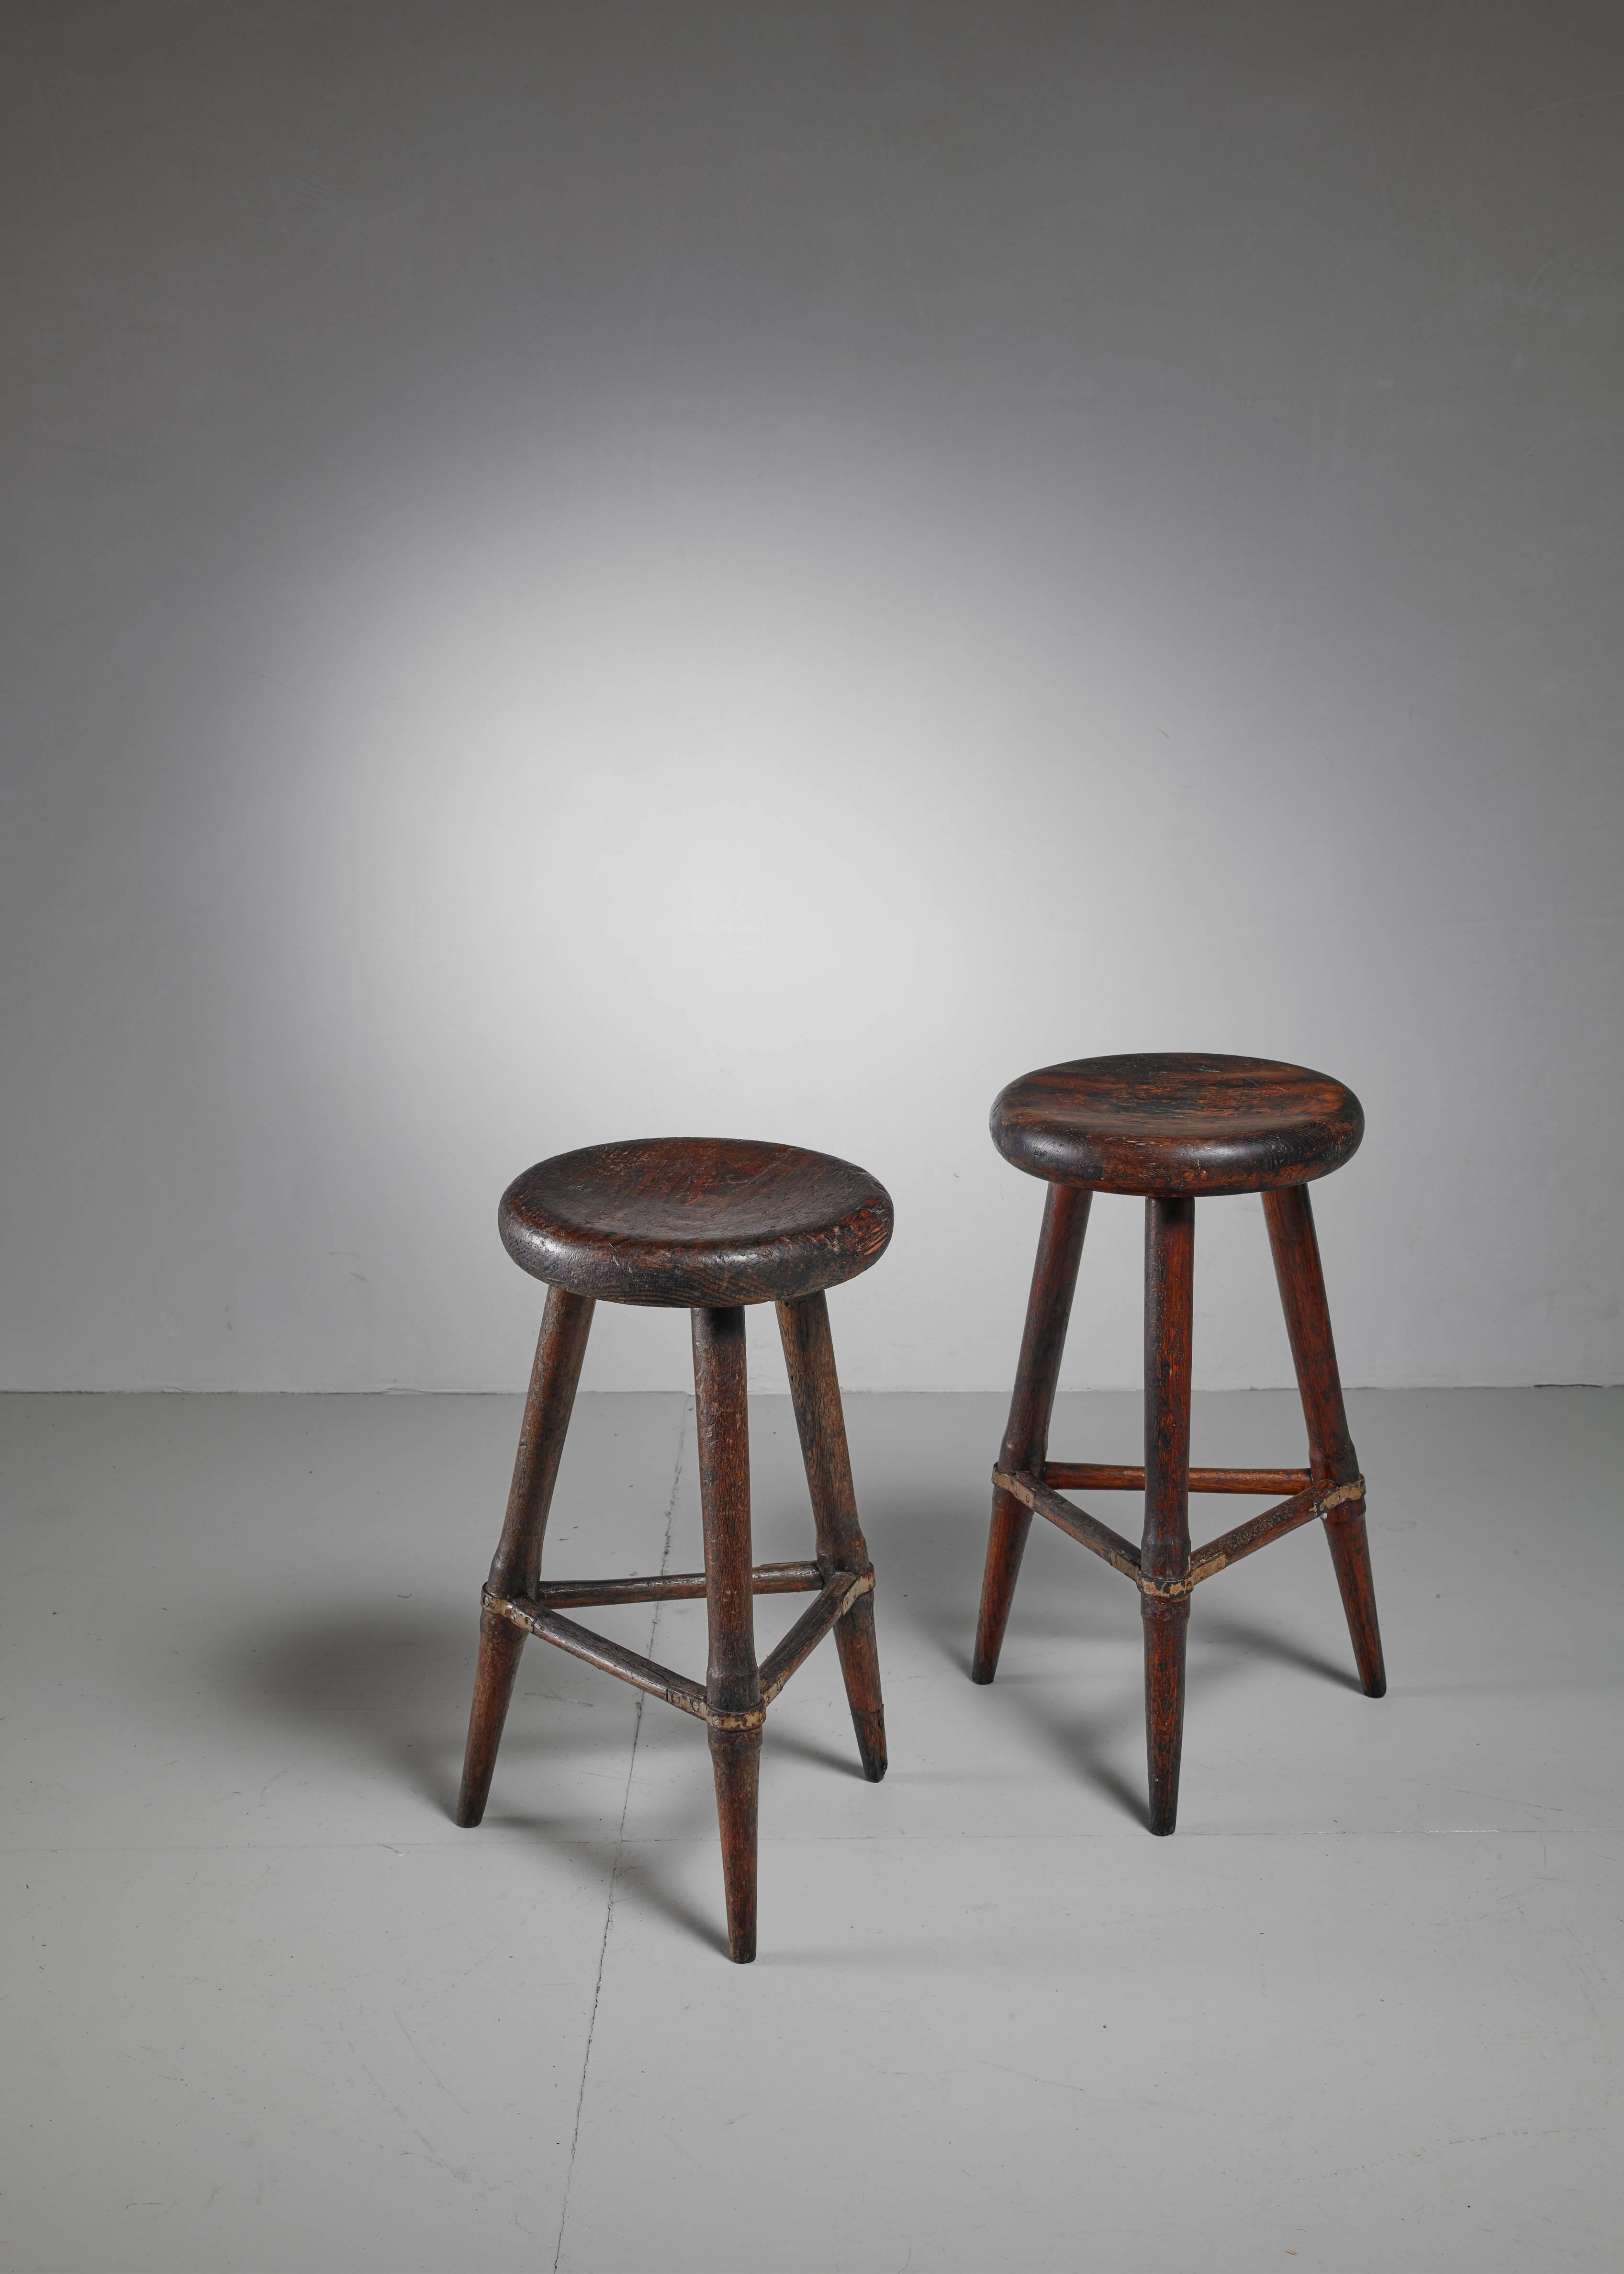 Scandinavian Modern Pair of High Scandinavian Wooden Tripod Stools with Iron Connections, 1930s For Sale